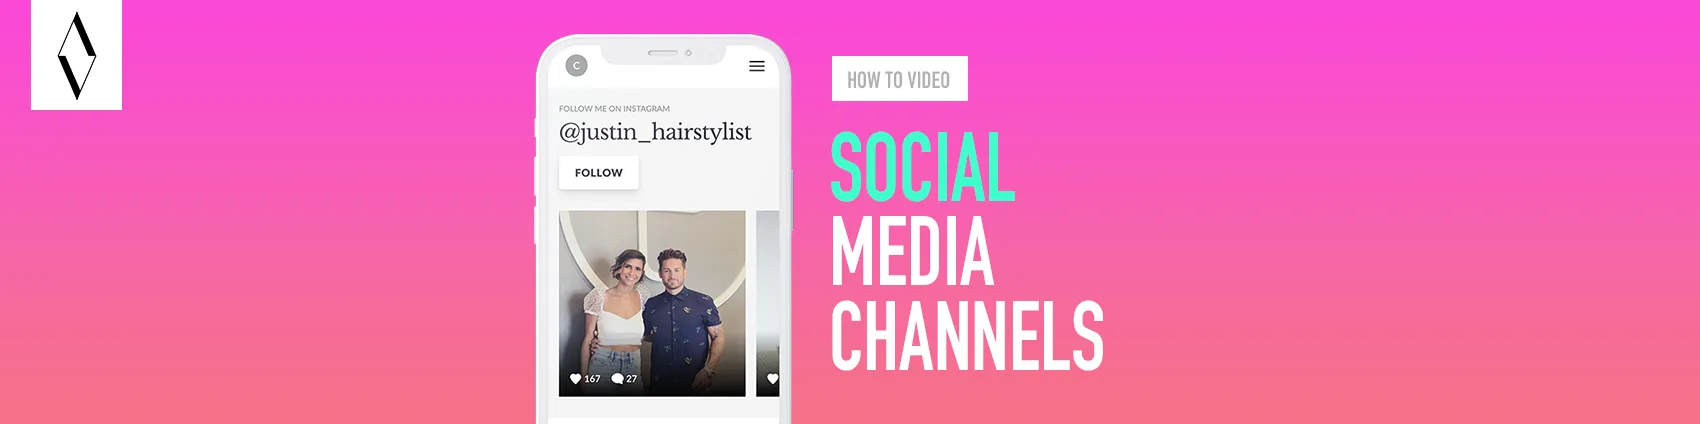 NEW* HOW TO SERIES: Getting Started with Social